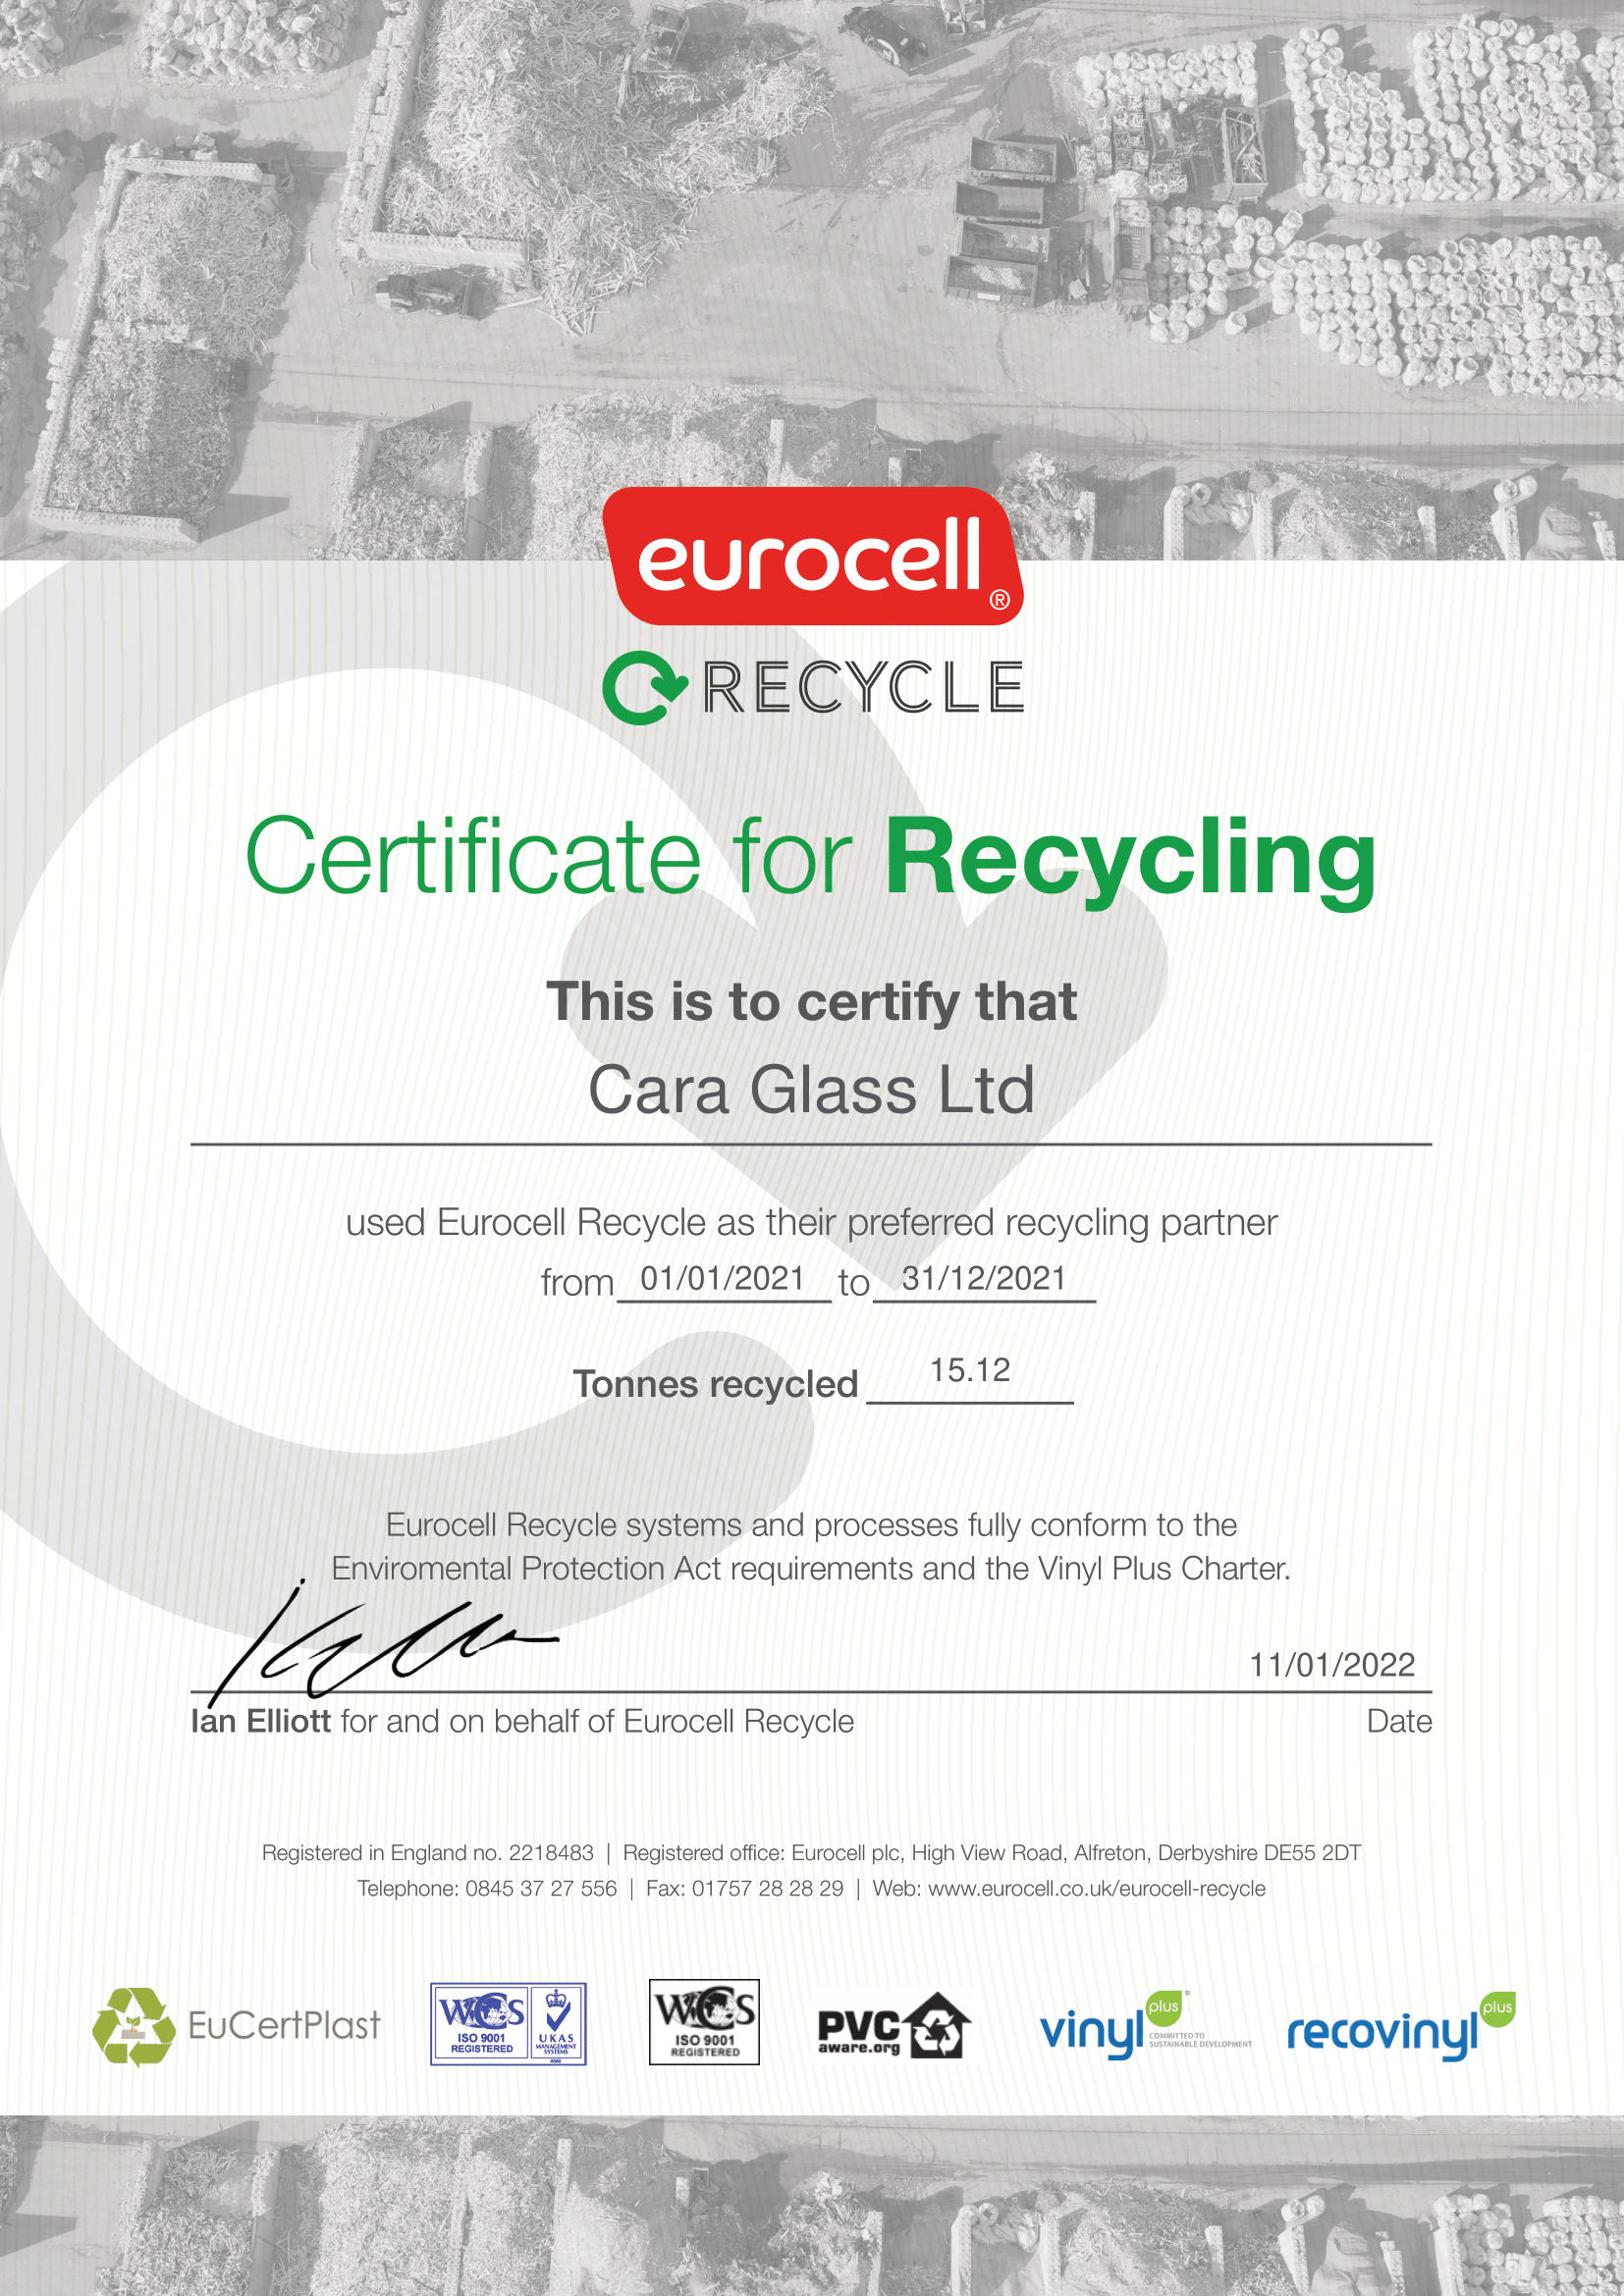 Certification for Recycling Eurocell